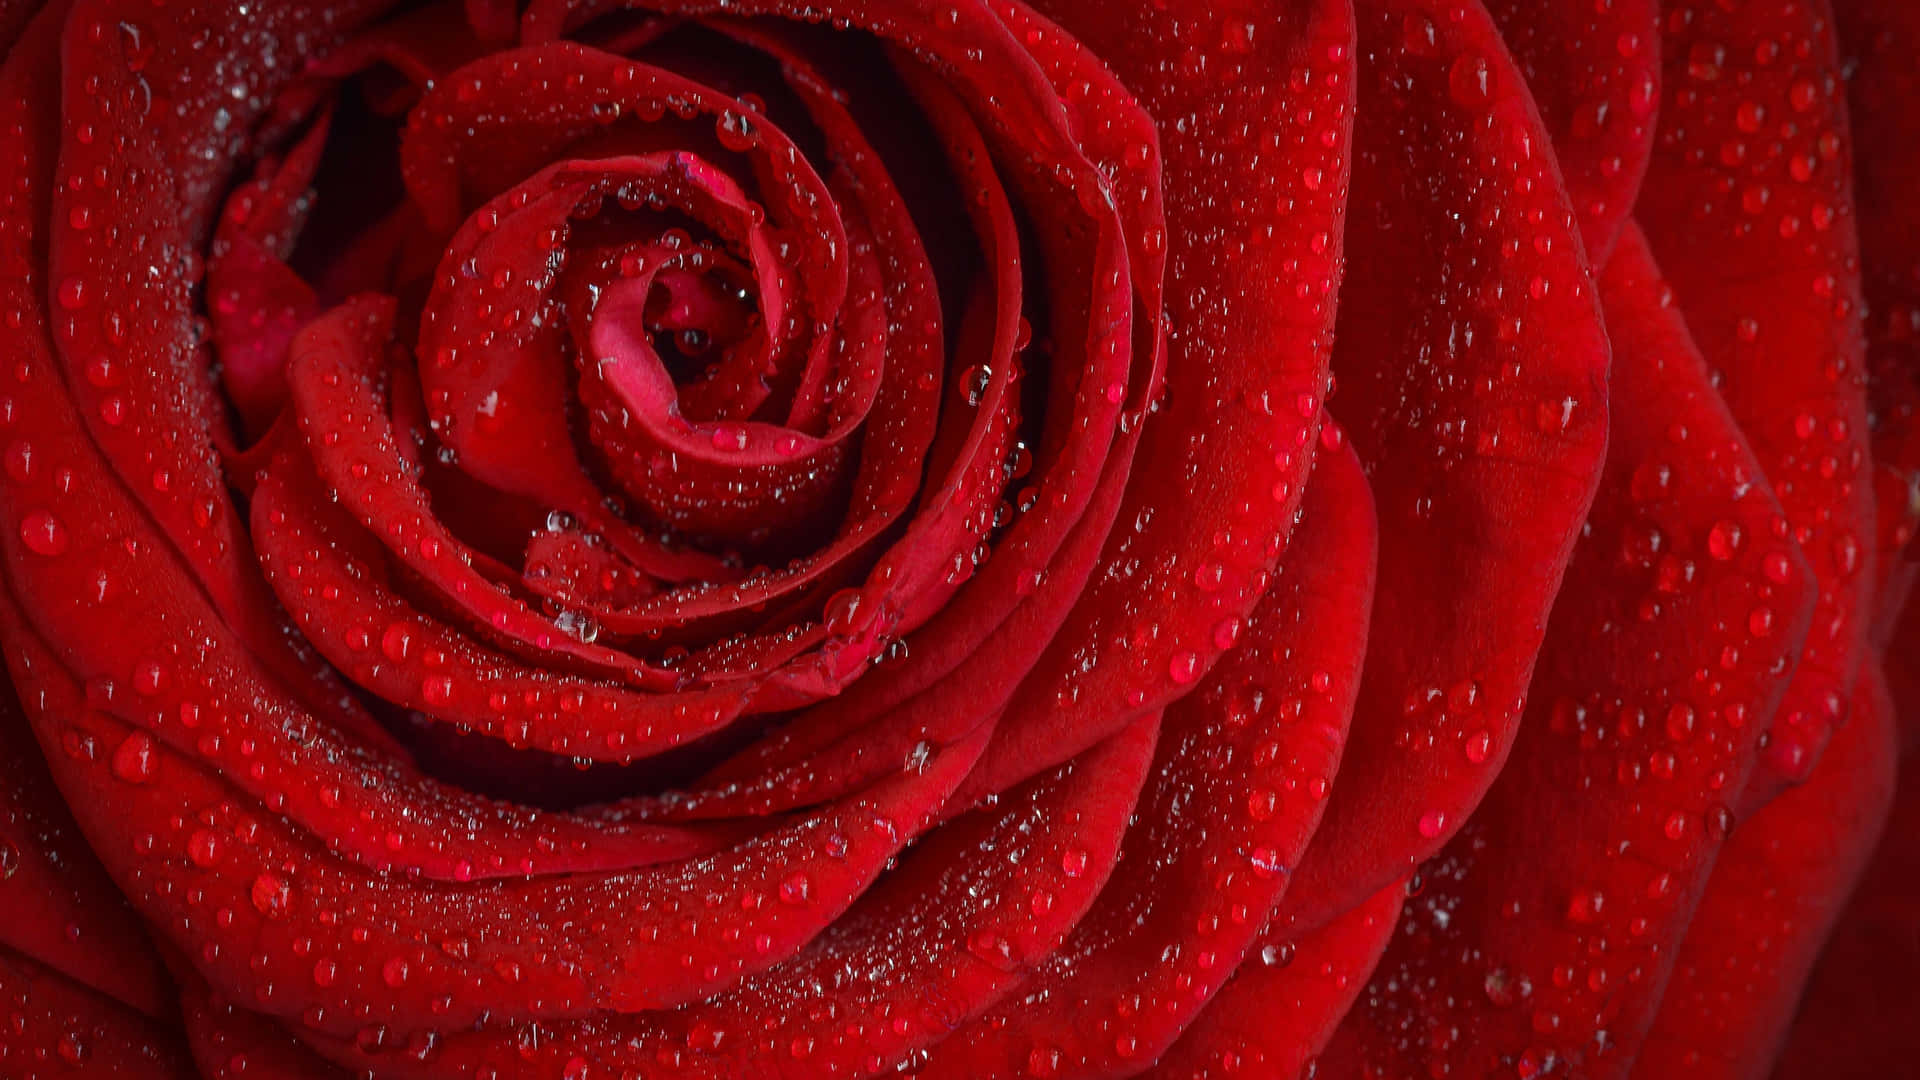 1440p Top View Shot Red Rose With Droplets Background